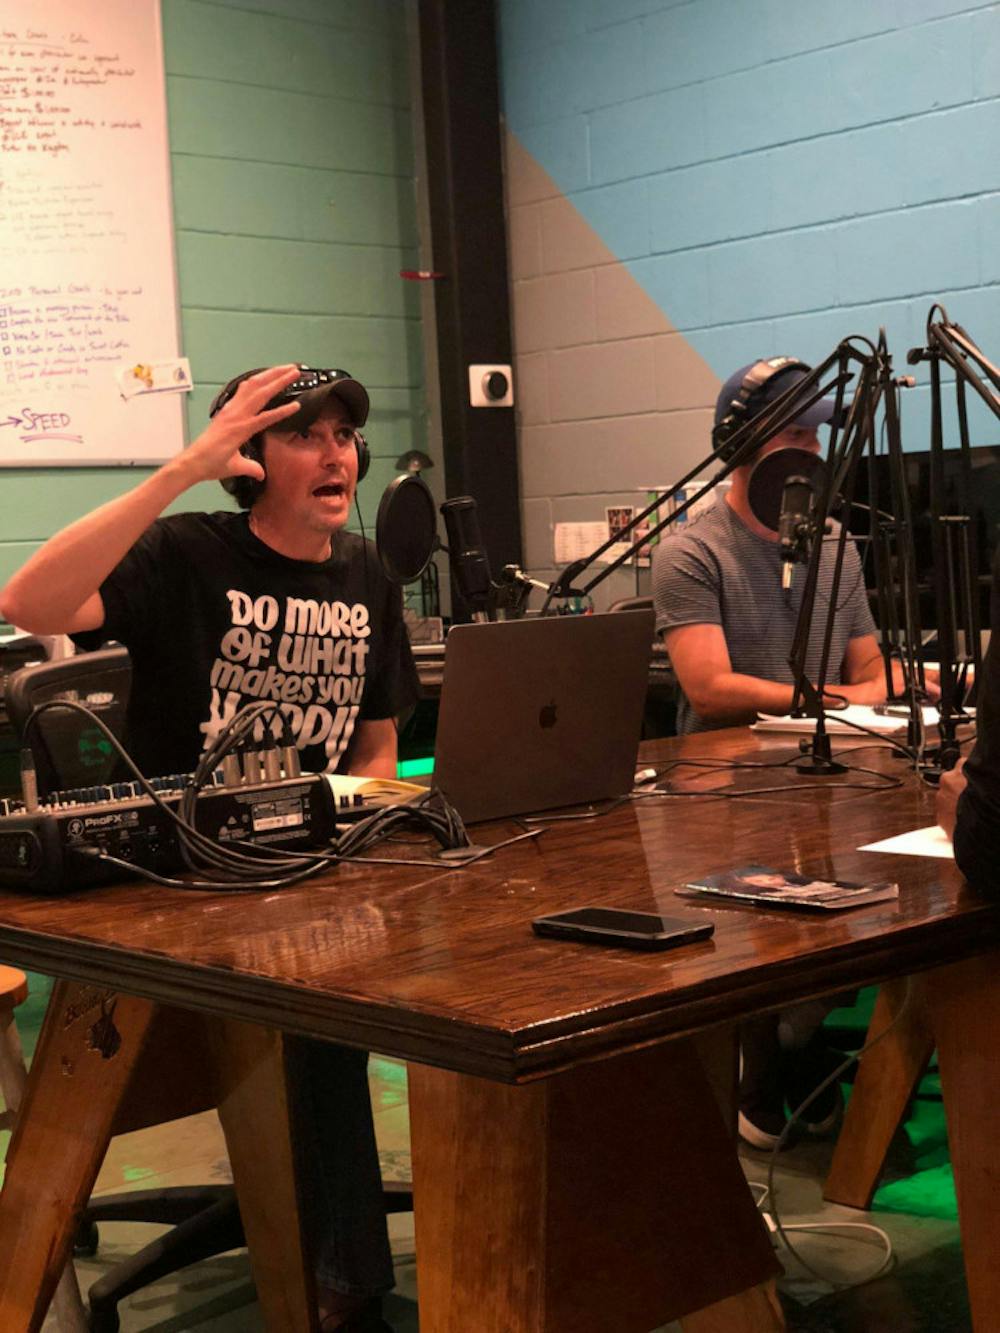 <div id=":qj" class="ii gt"><div id=":qi" class="a3s aXjCH"><div dir="ltr">Founder and one of the "WHOA GNV" podcast hosts, Collin Austin, said working on the podcast is one of his favorite parts of the week.</div></div></div>